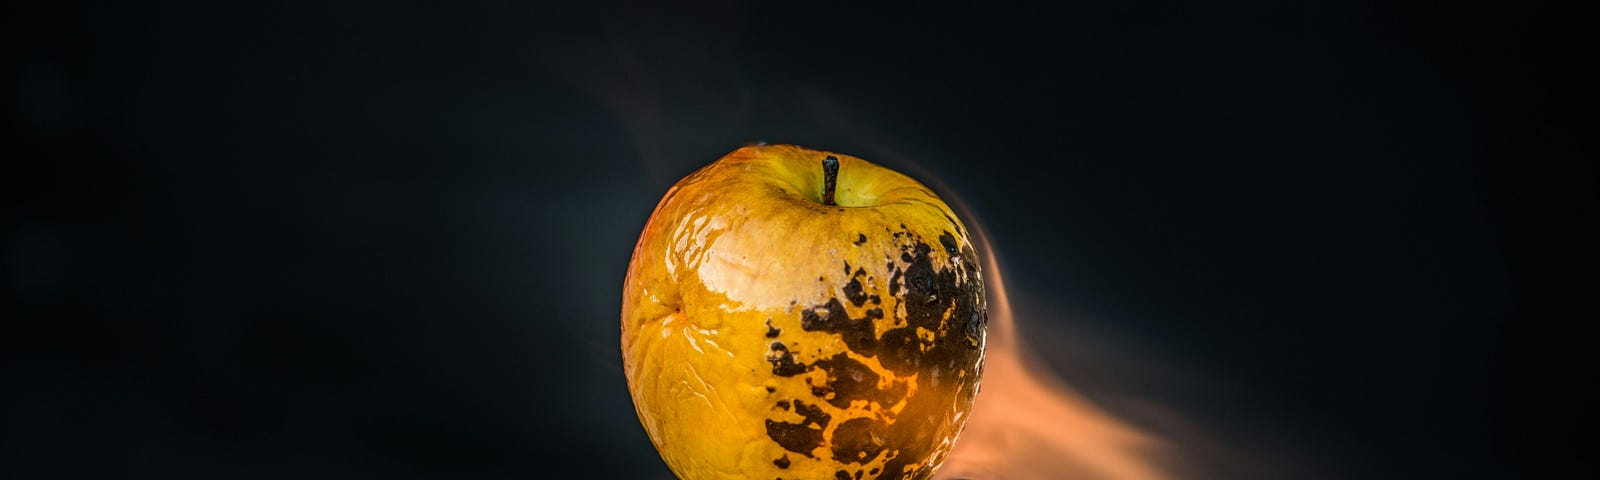 An apple having heat from a blowtorch applied to it.